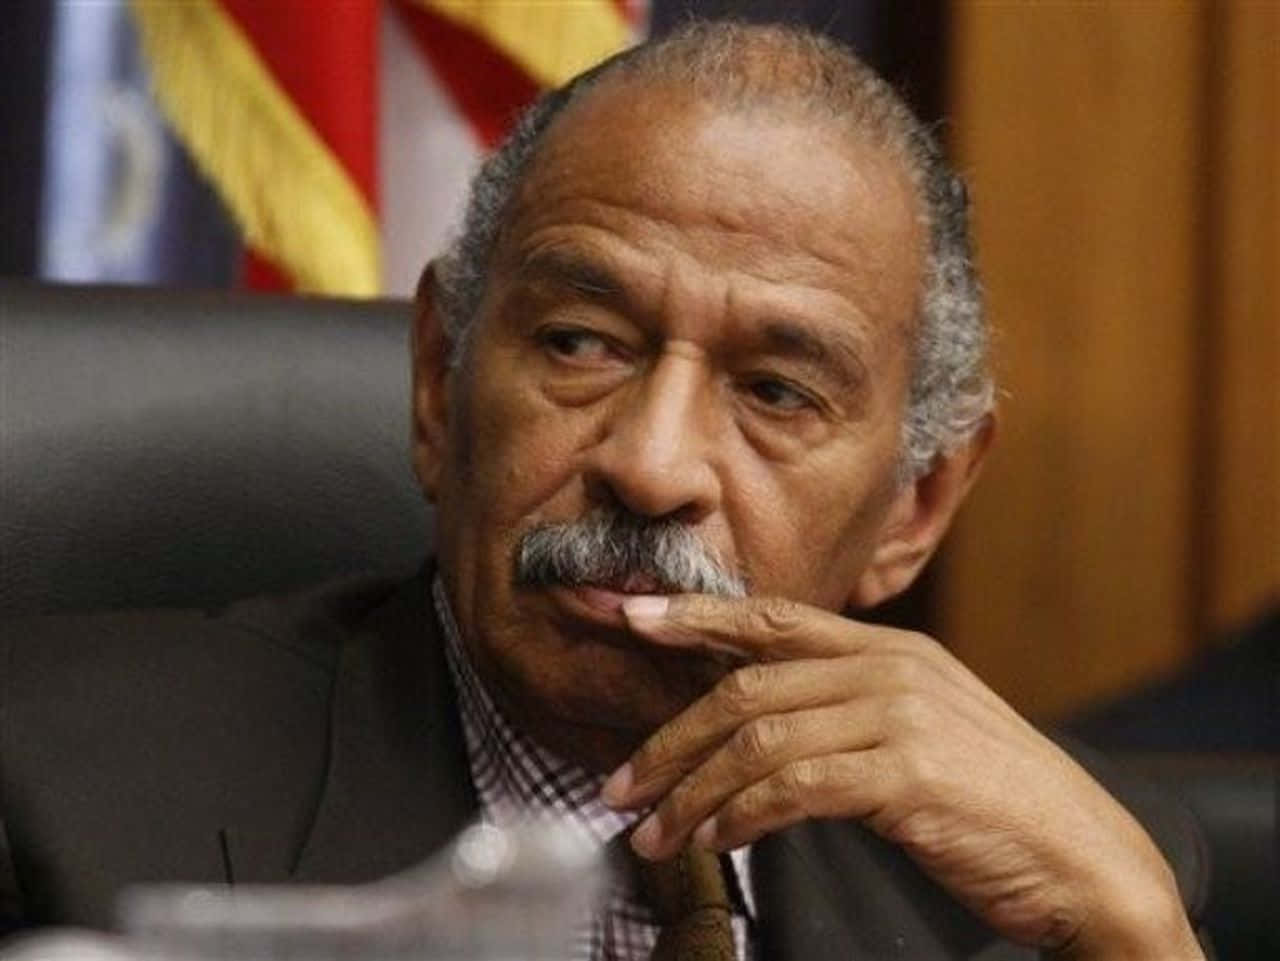 John Conyers Staunchly Delivering A Speech Wallpaper